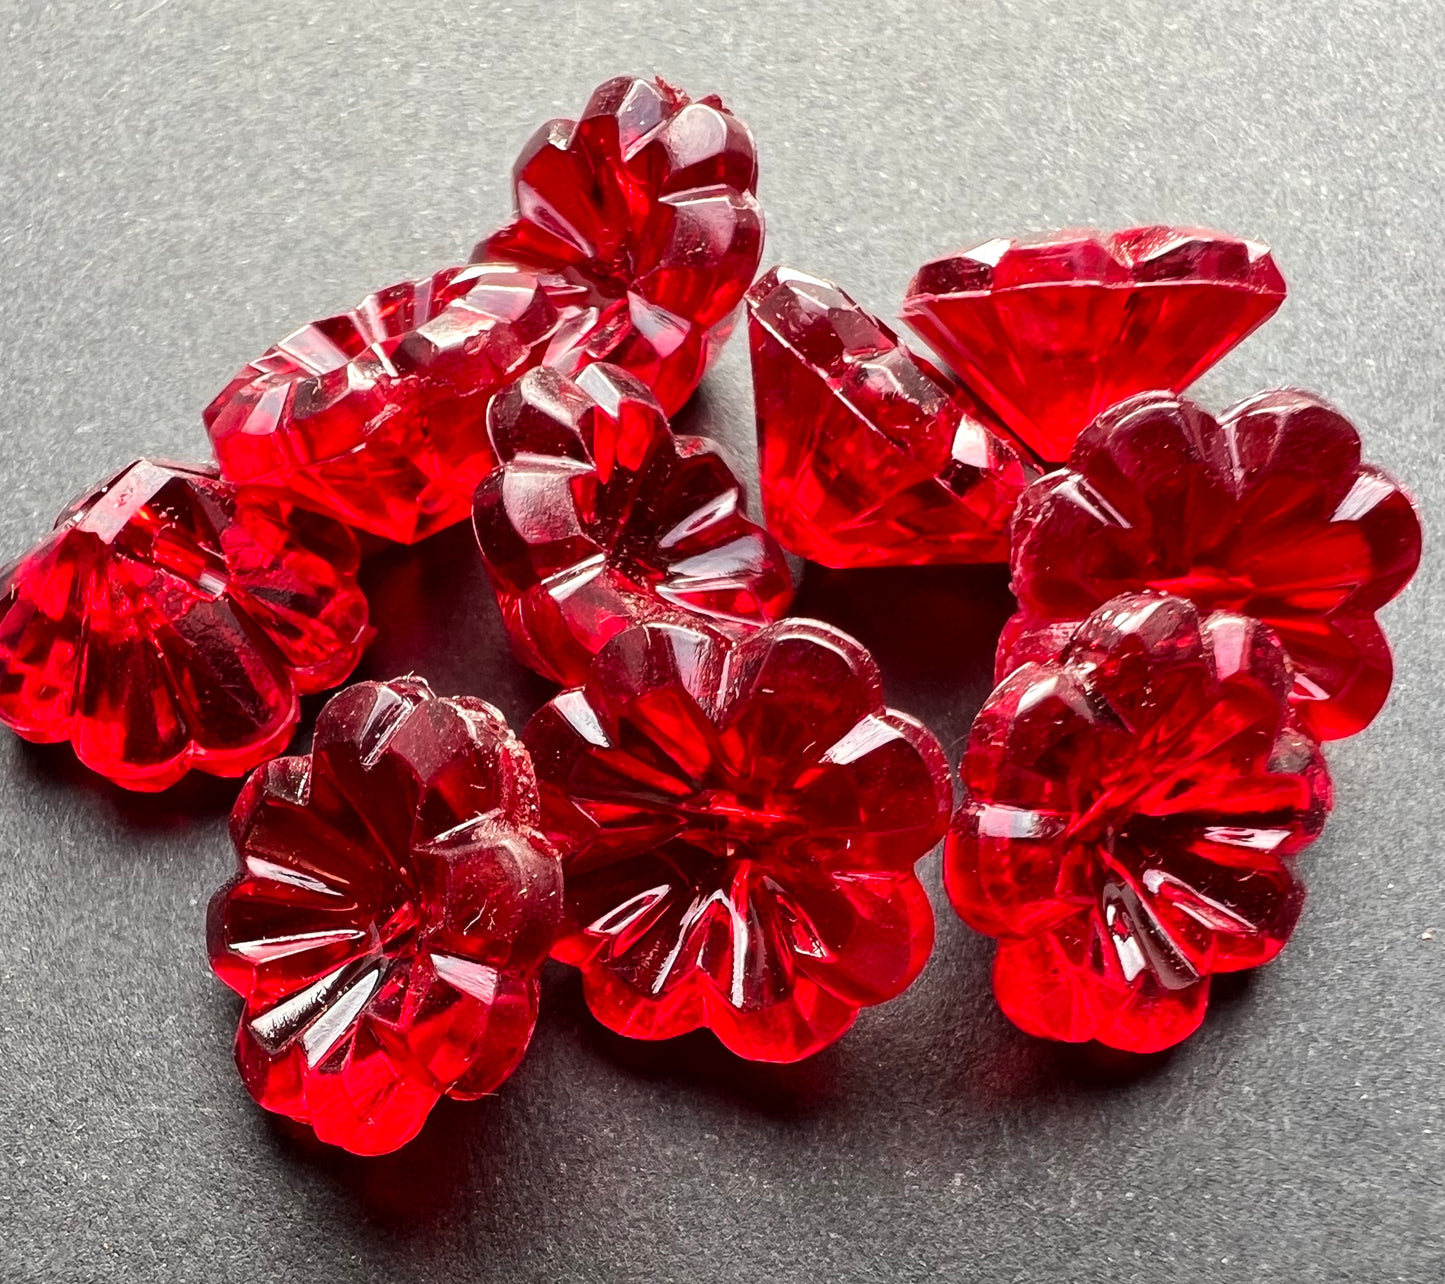 Ruby Red Vintage Flower Buttons -1.2cm wide - 6, 10 or 20.